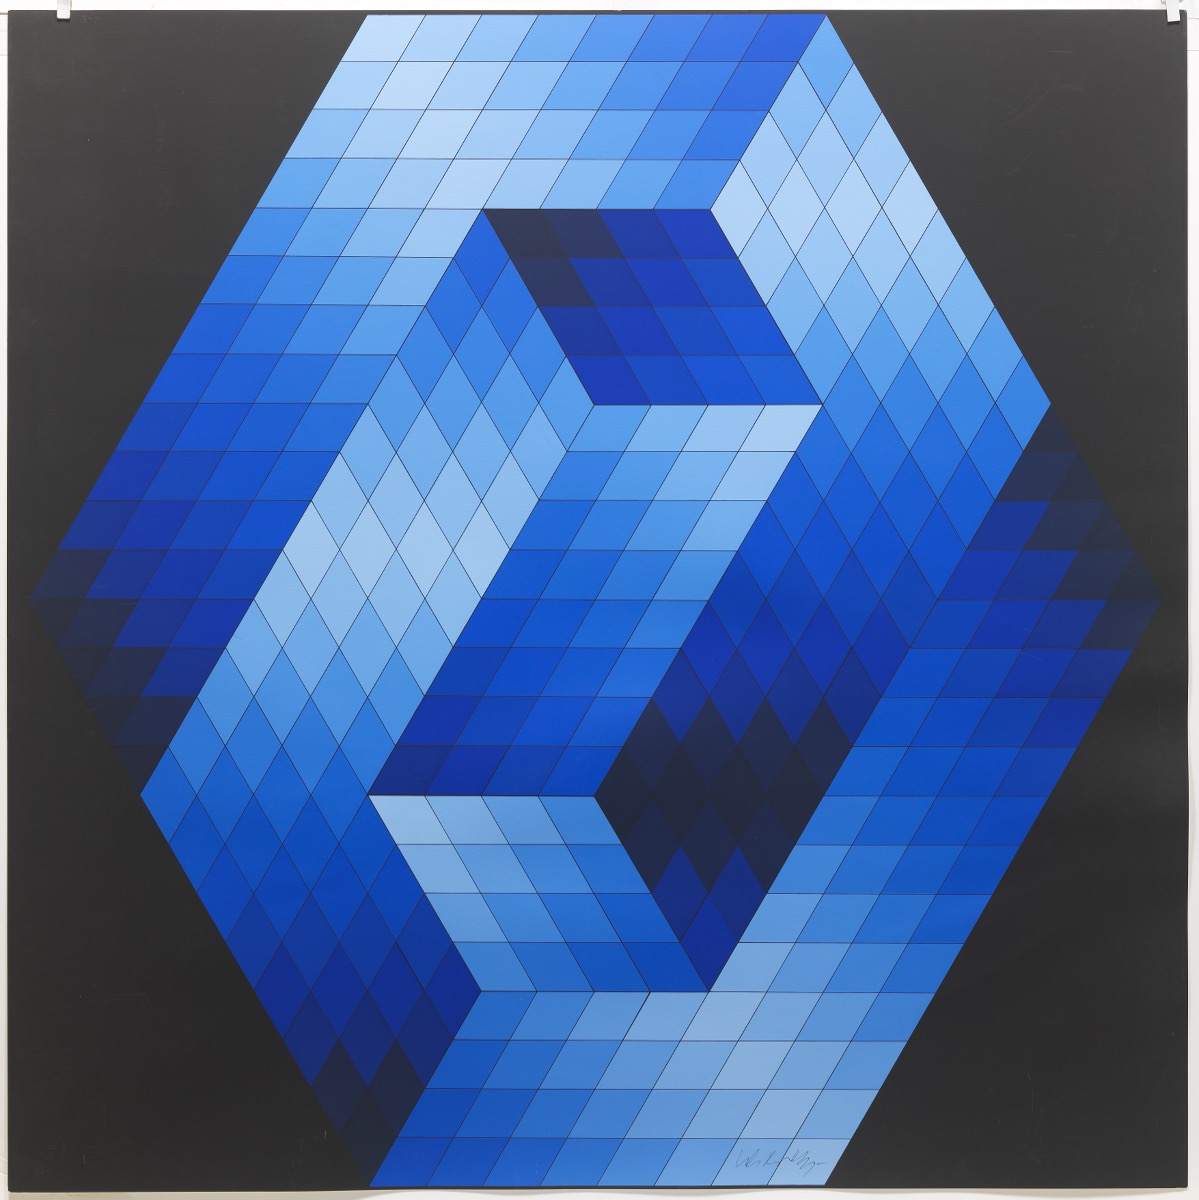 Victor Vasarely (French, 1908-1997) - Image 2 of 4